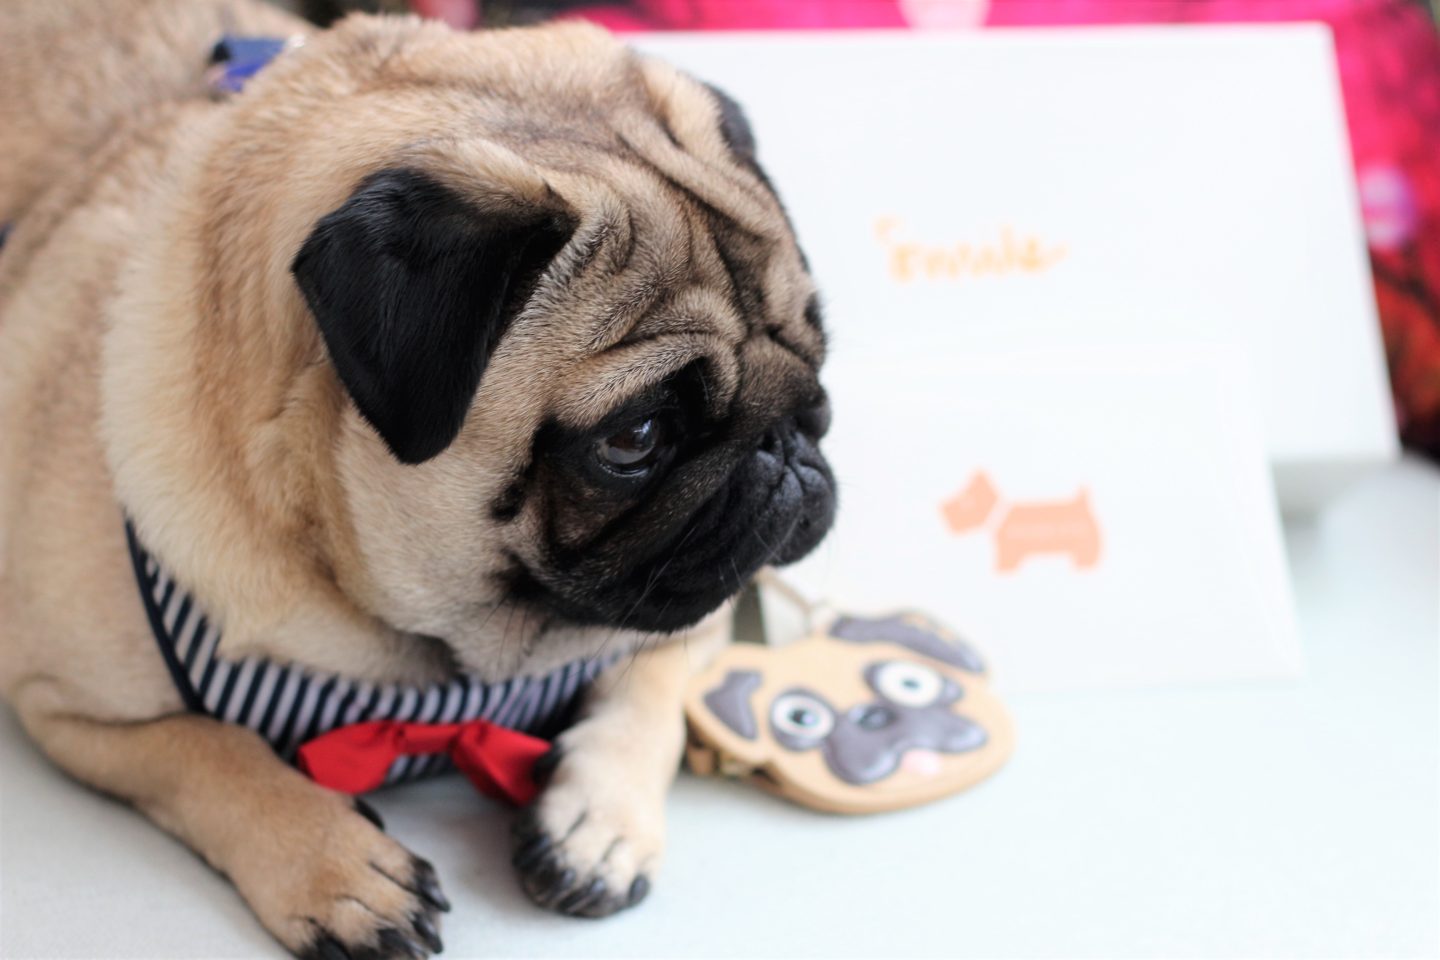 Radley and Friends Pug Purse for their 20th Anniversary Dogs Trust Purses